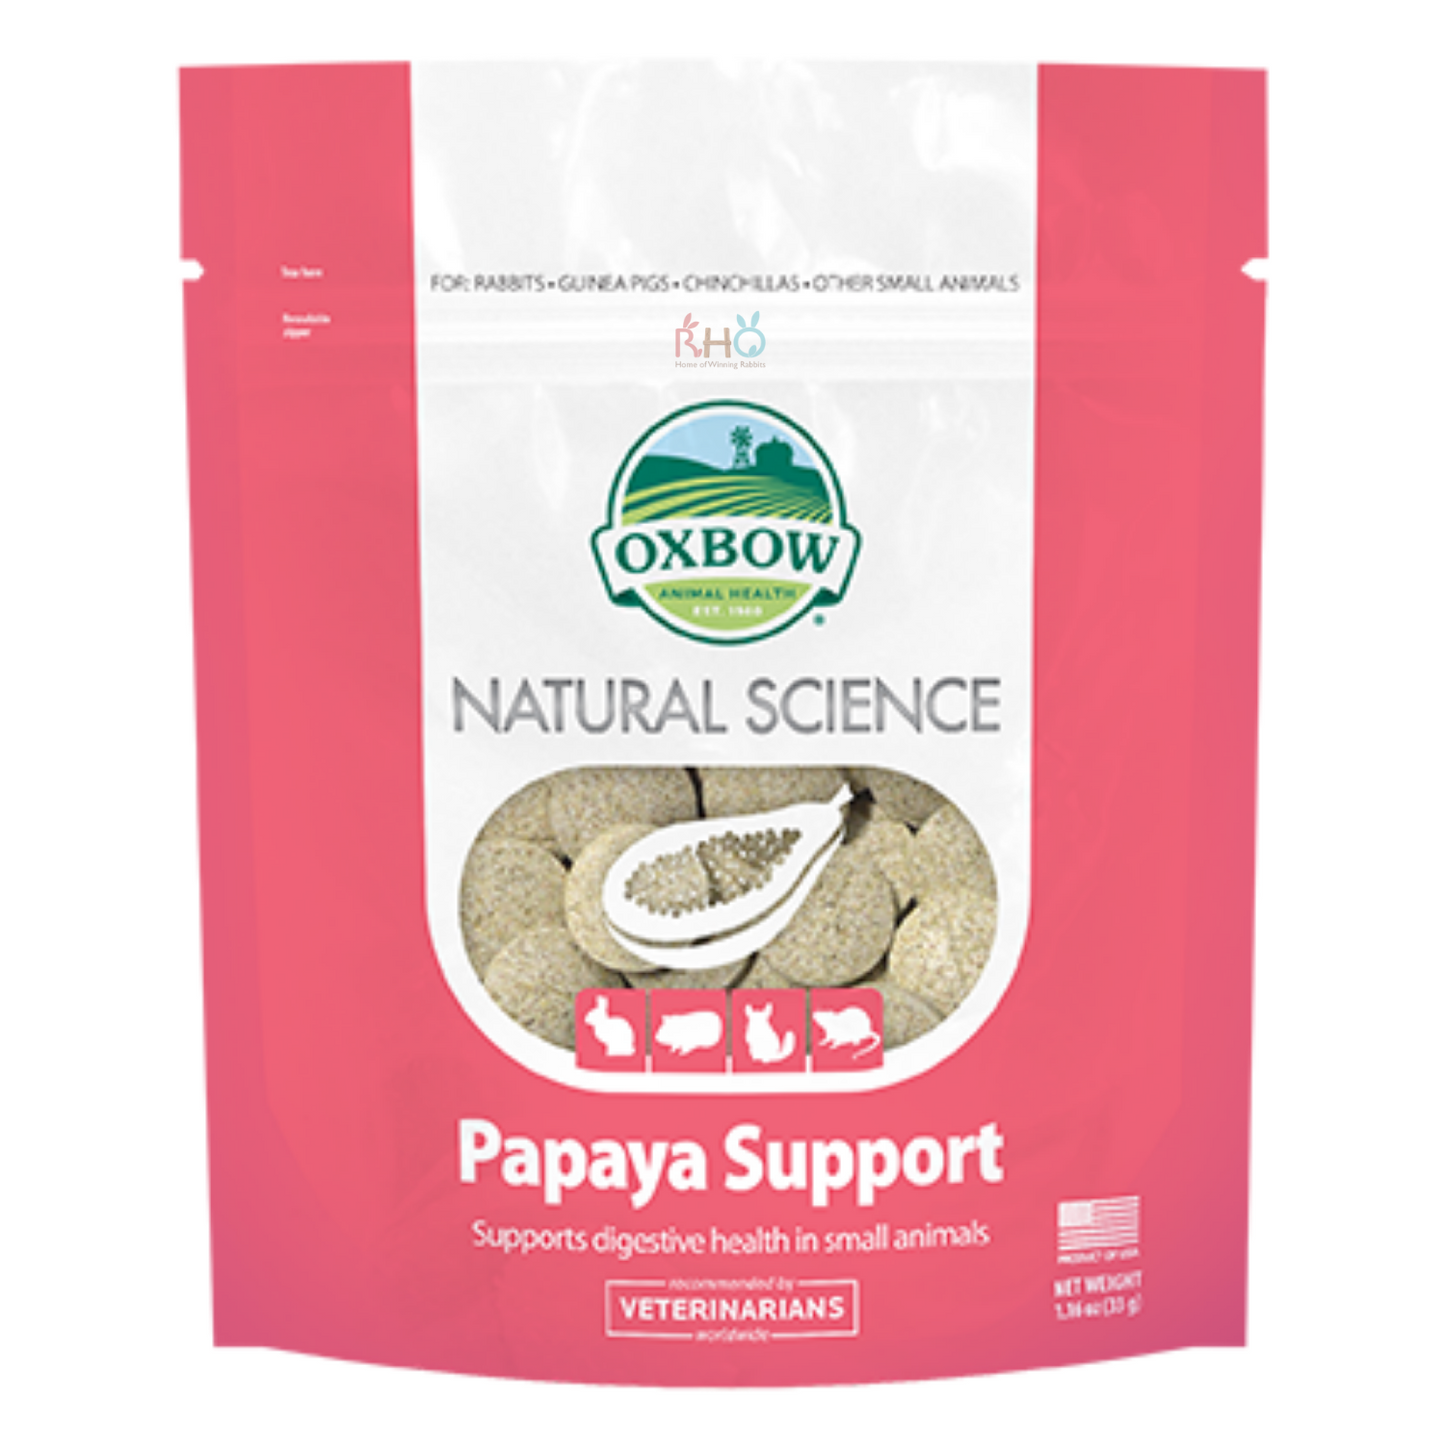 Clearance : Oxbow Natural Science Papaya Support 33g (EXP : DEC 2023)